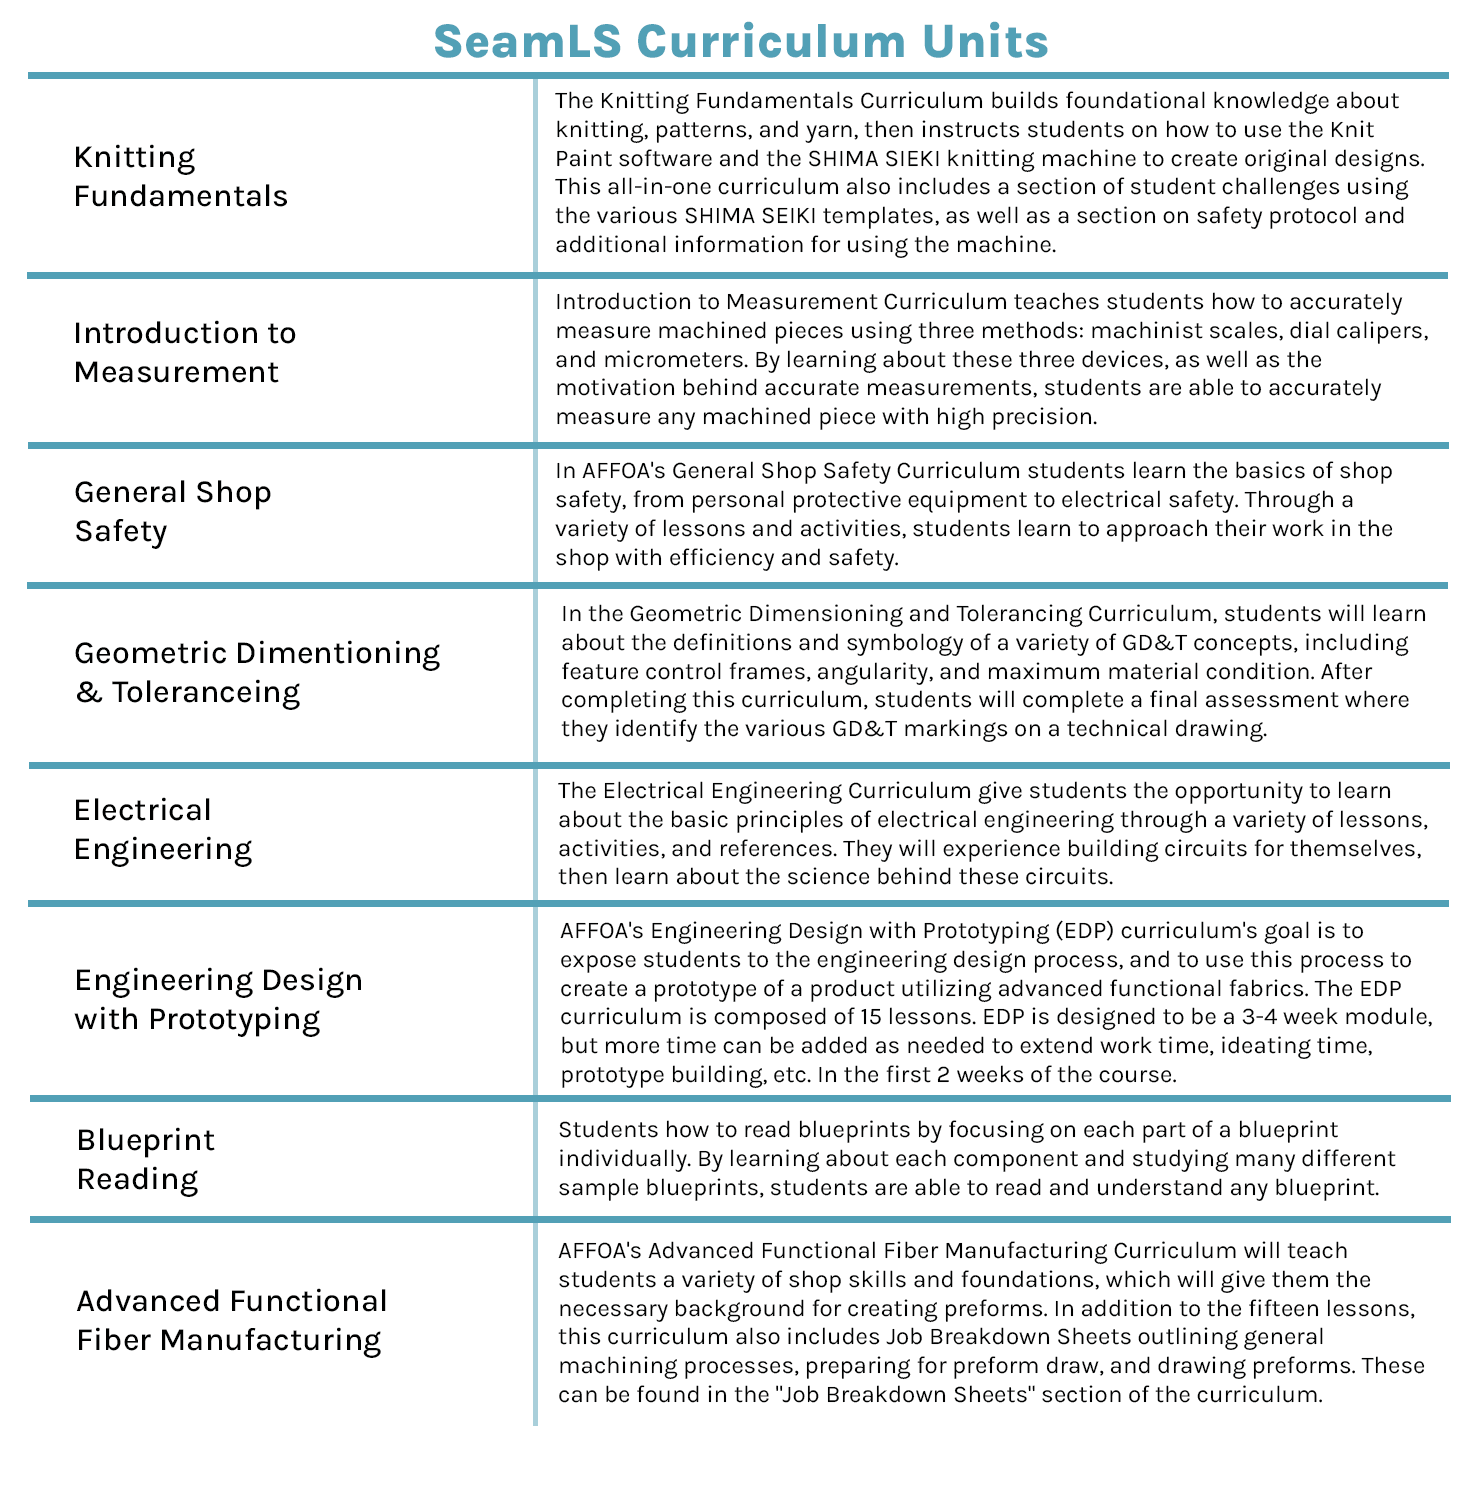 seamls_table_of_curriculum_units